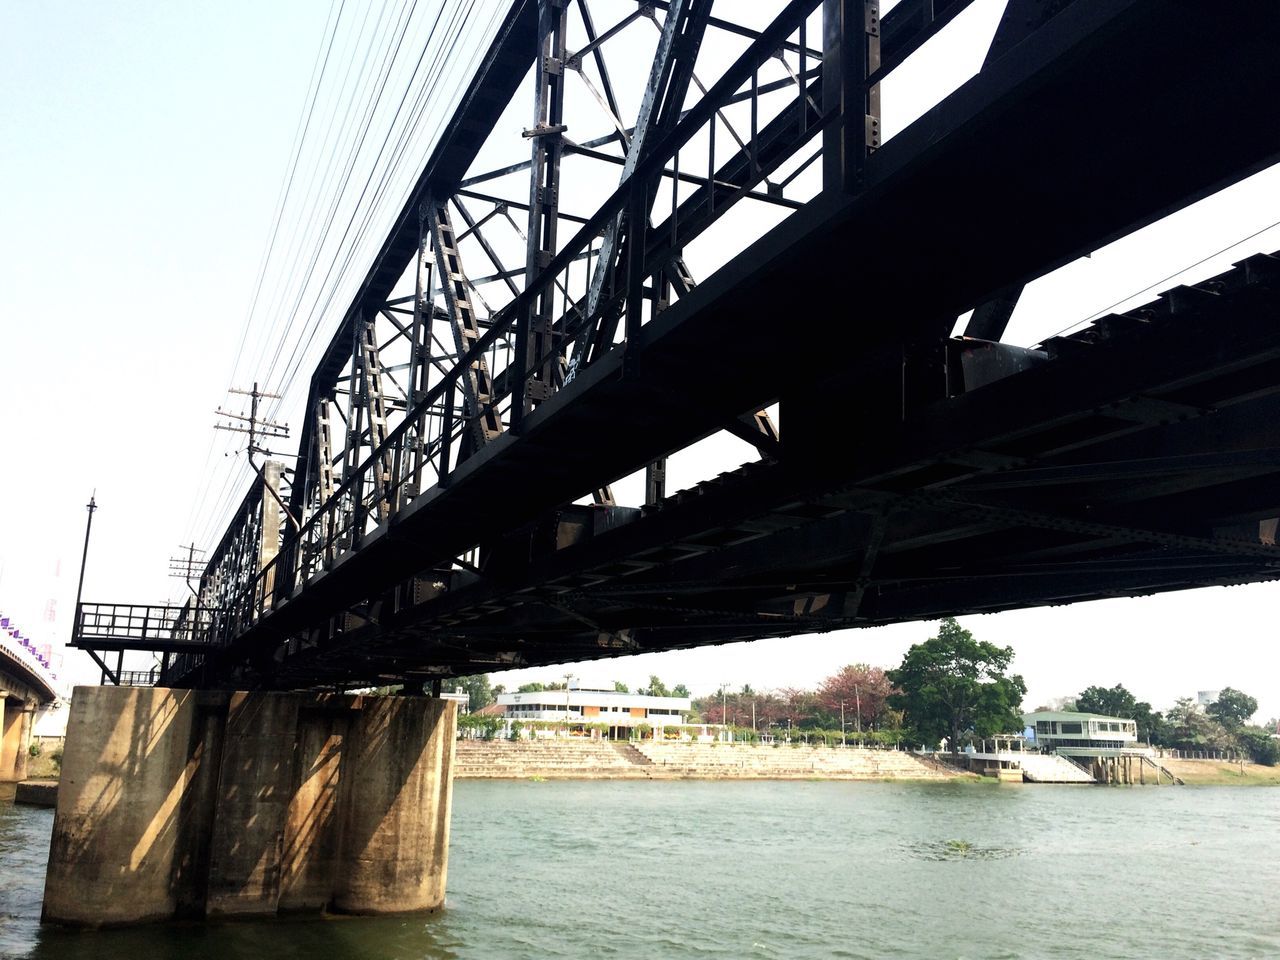 connection, built structure, bridge - man made structure, architecture, water, engineering, river, low angle view, bridge, waterfront, transportation, clear sky, sky, suspension bridge, metal, no people, day, outdoors, long, nature